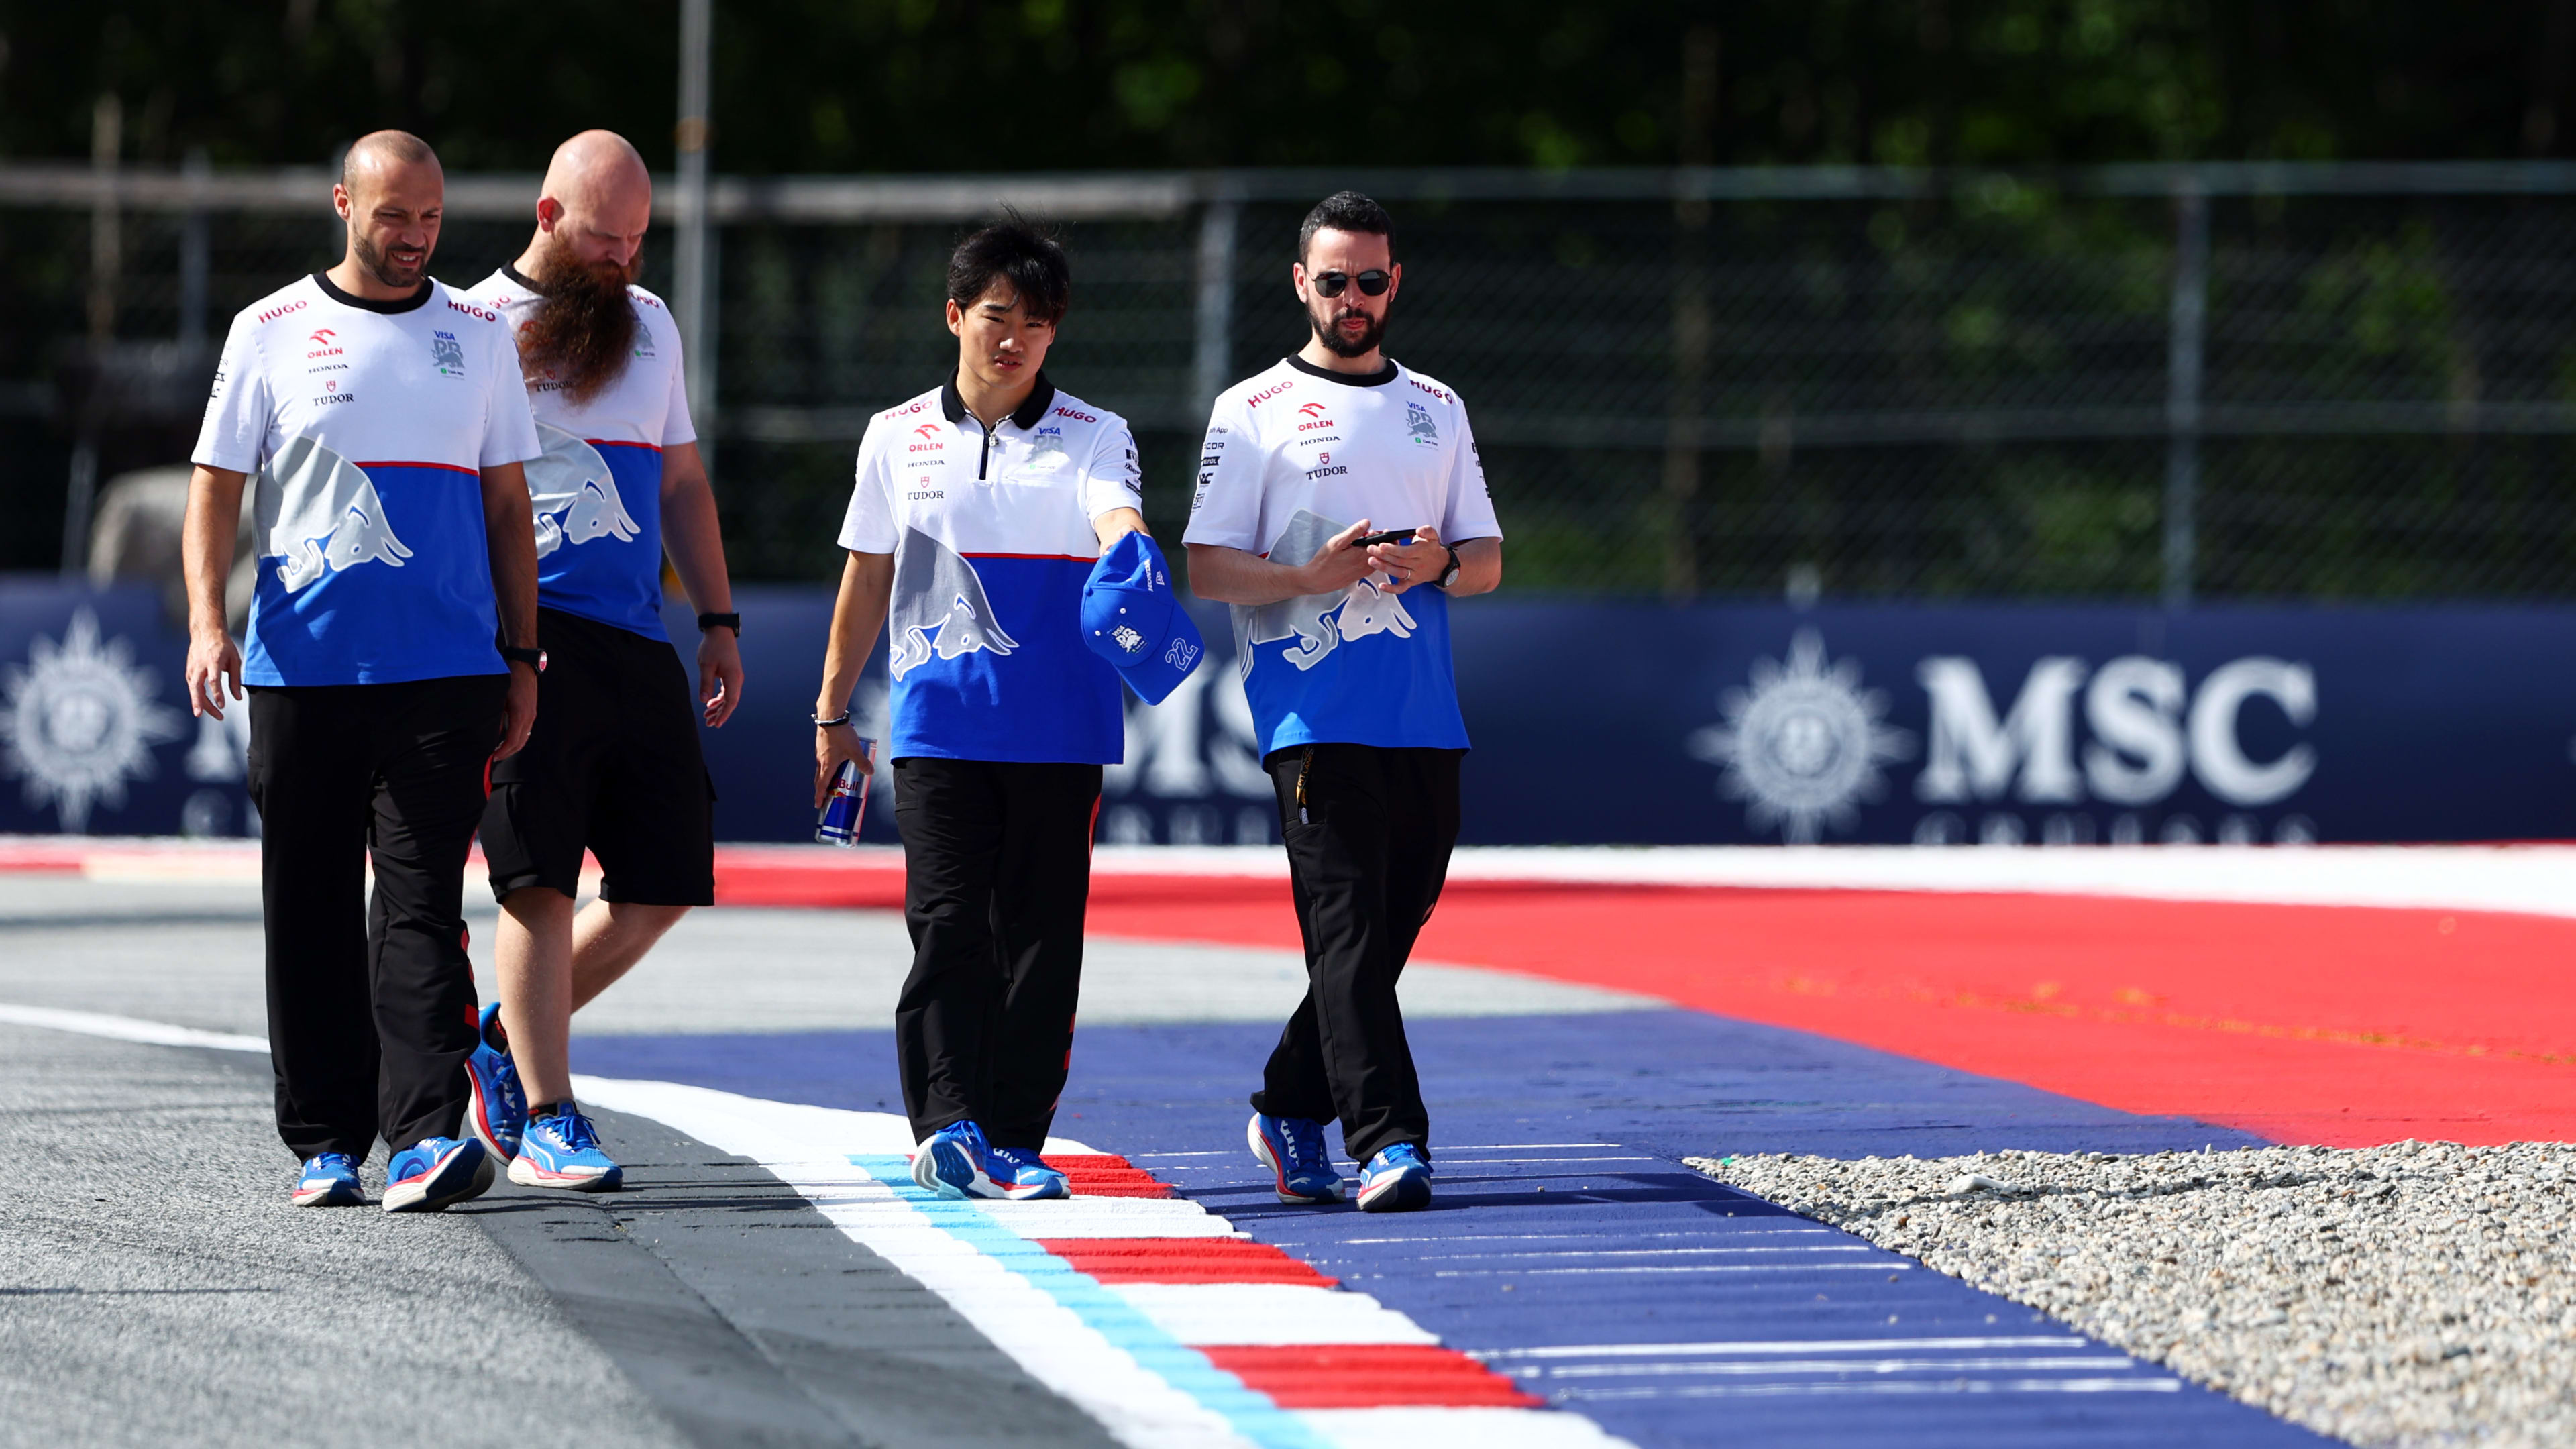 LIVE COVERAGE: Follow all the action from first practice for the Austrian Grand Prix